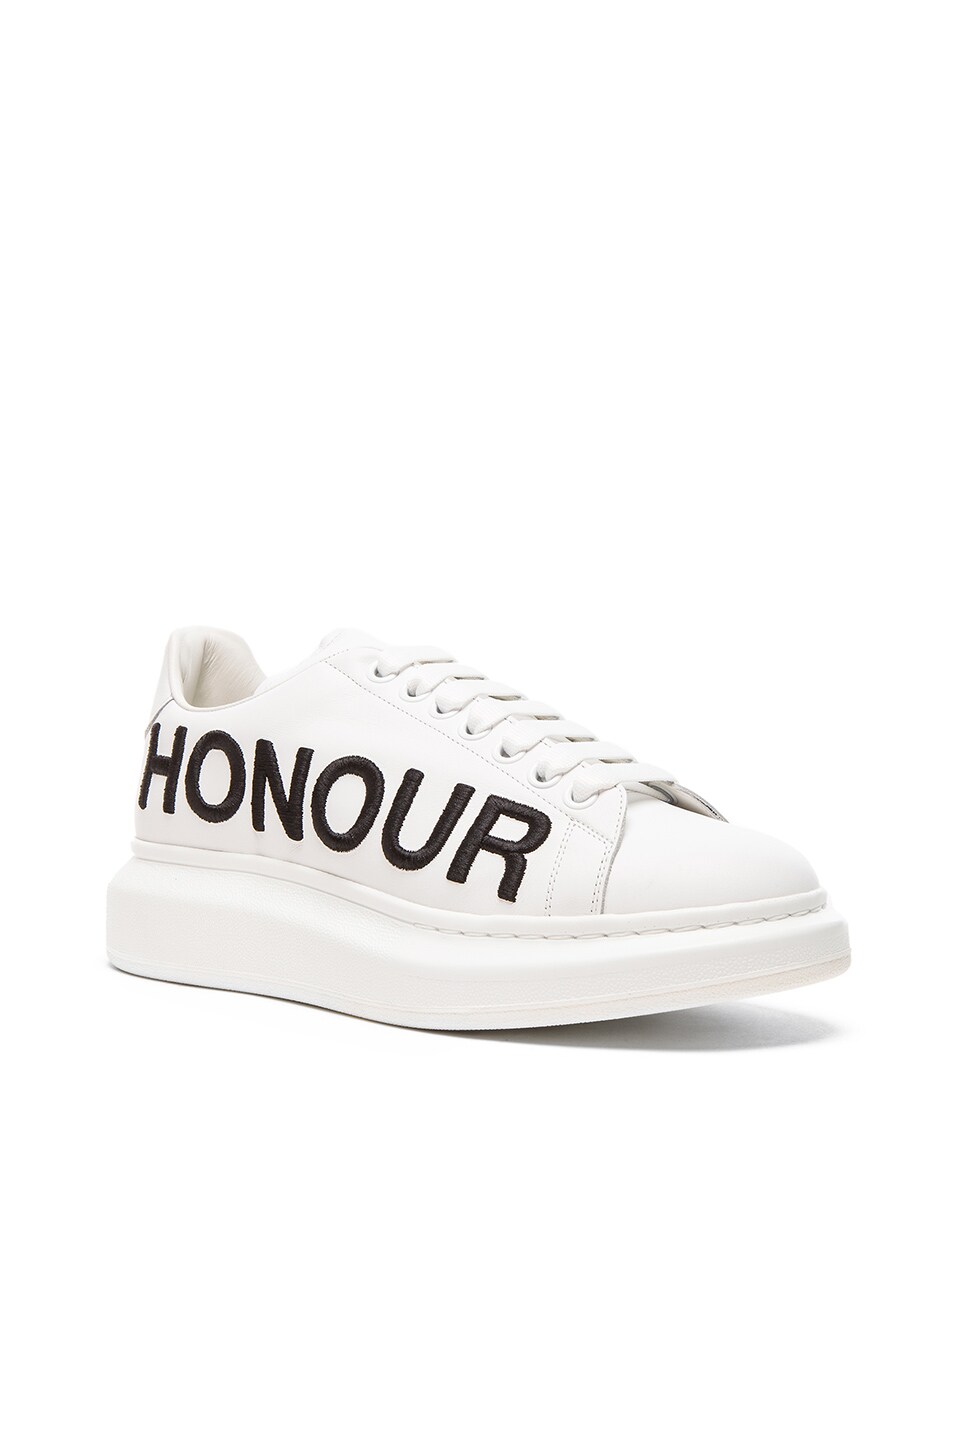 Image 1 of Alexander McQueen Honour & Truth Leather Sneakers in White